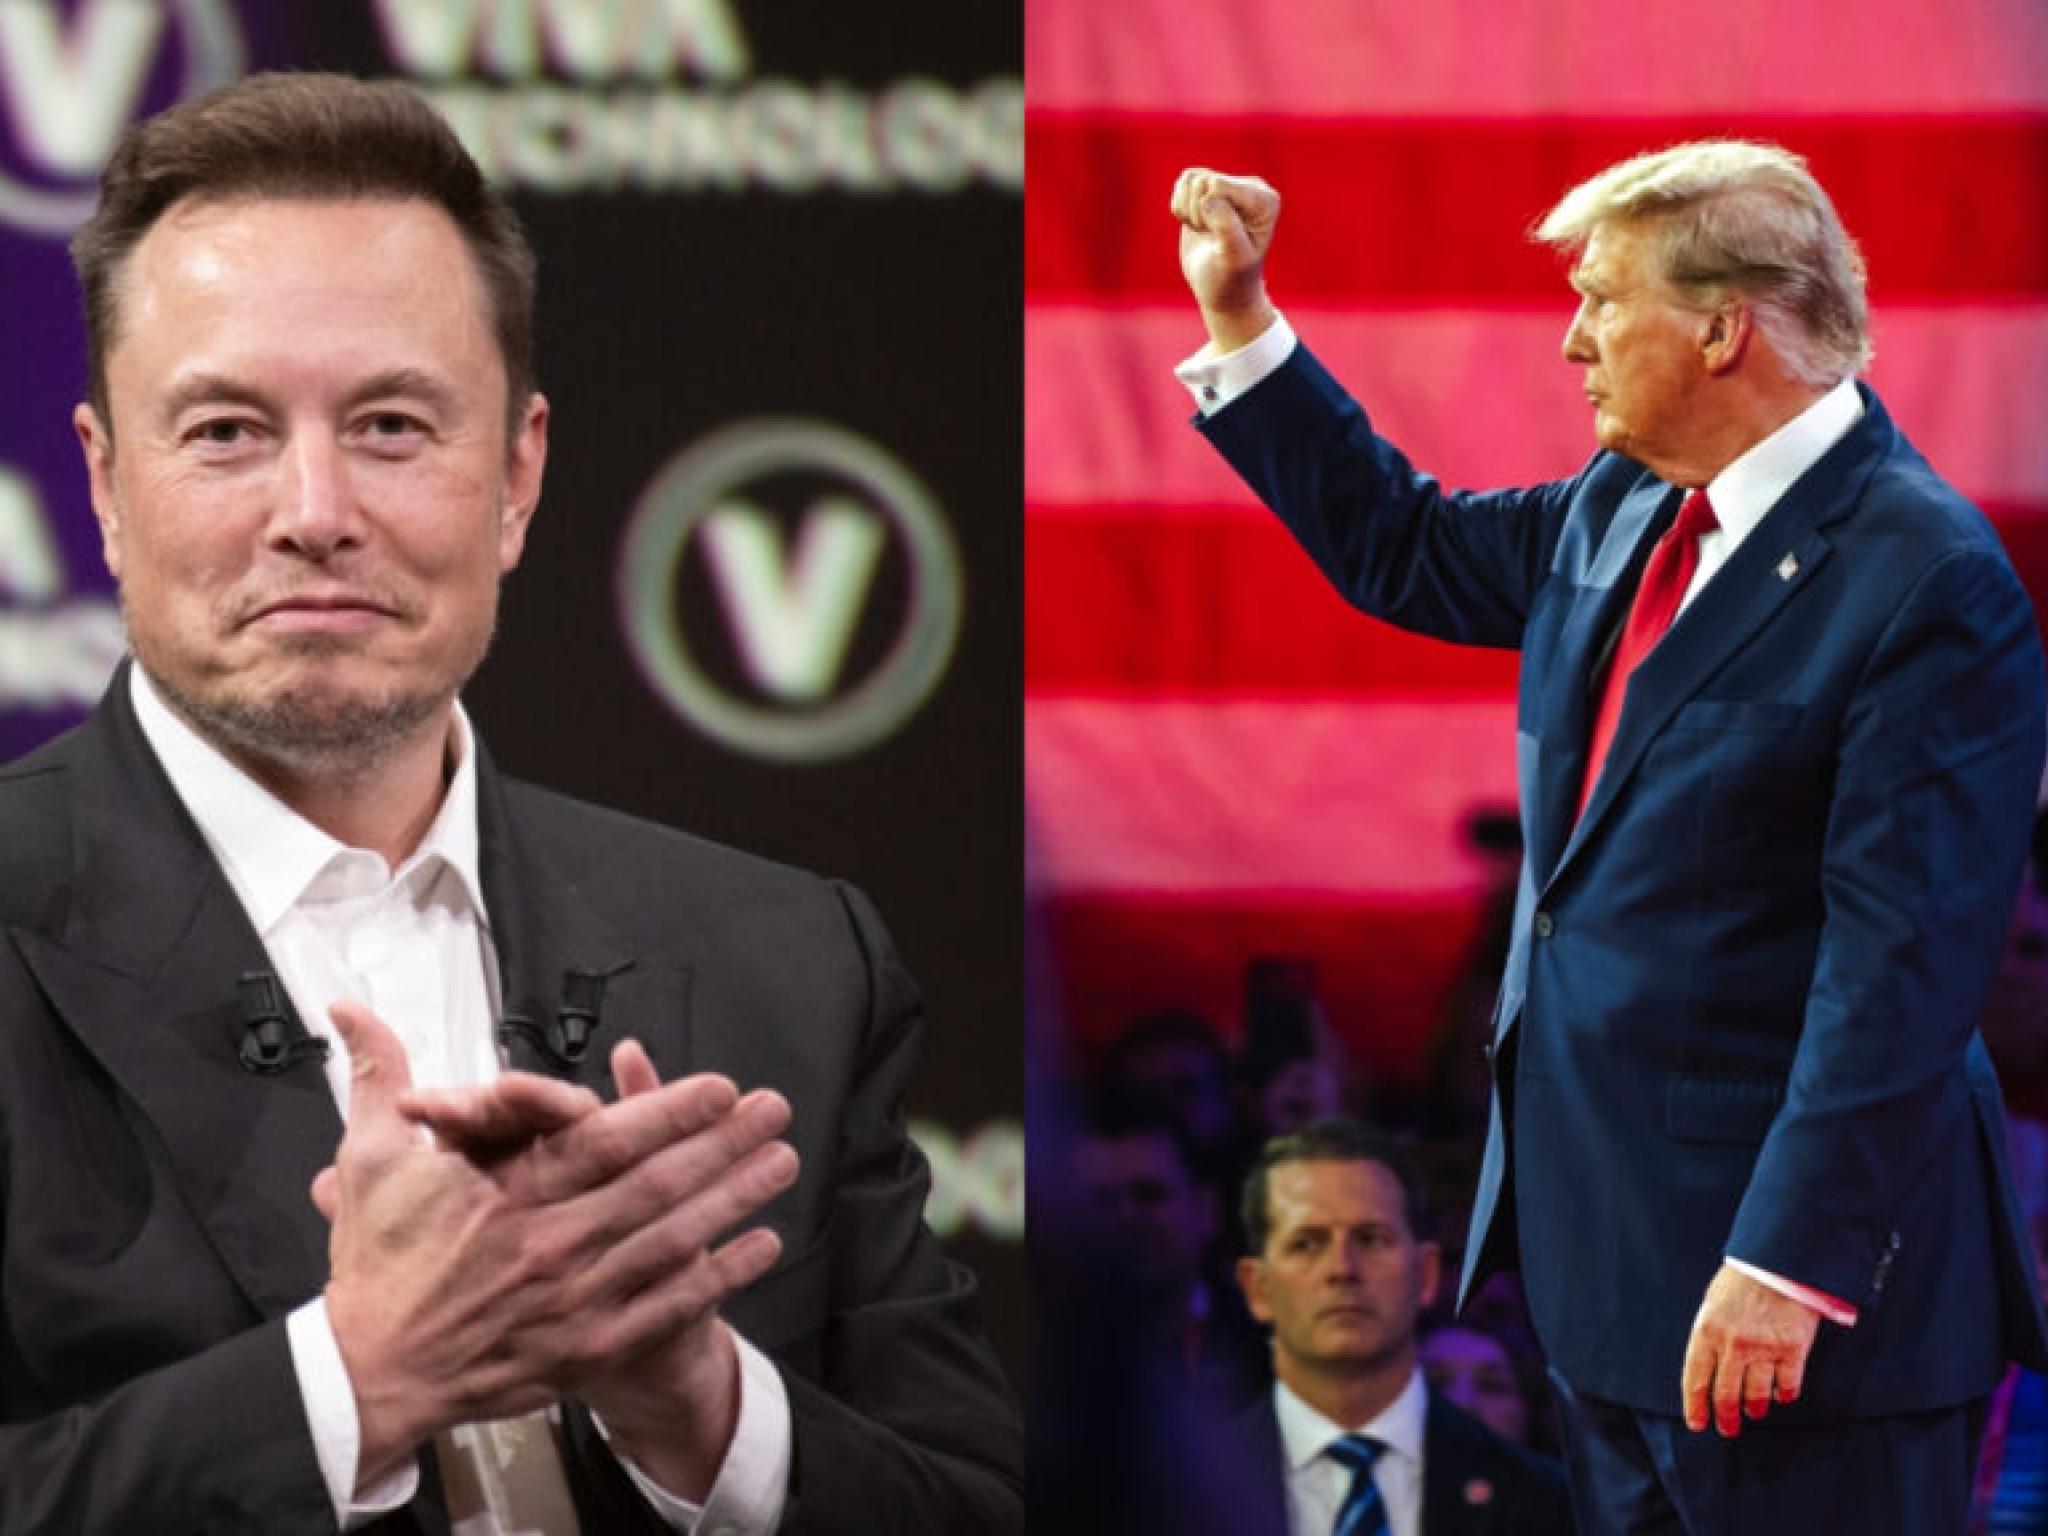  elon-musk-reacts-with-fake-gnus-post-to-report-of-45m-monthly-funding-for-pro-trump-pac-updated 